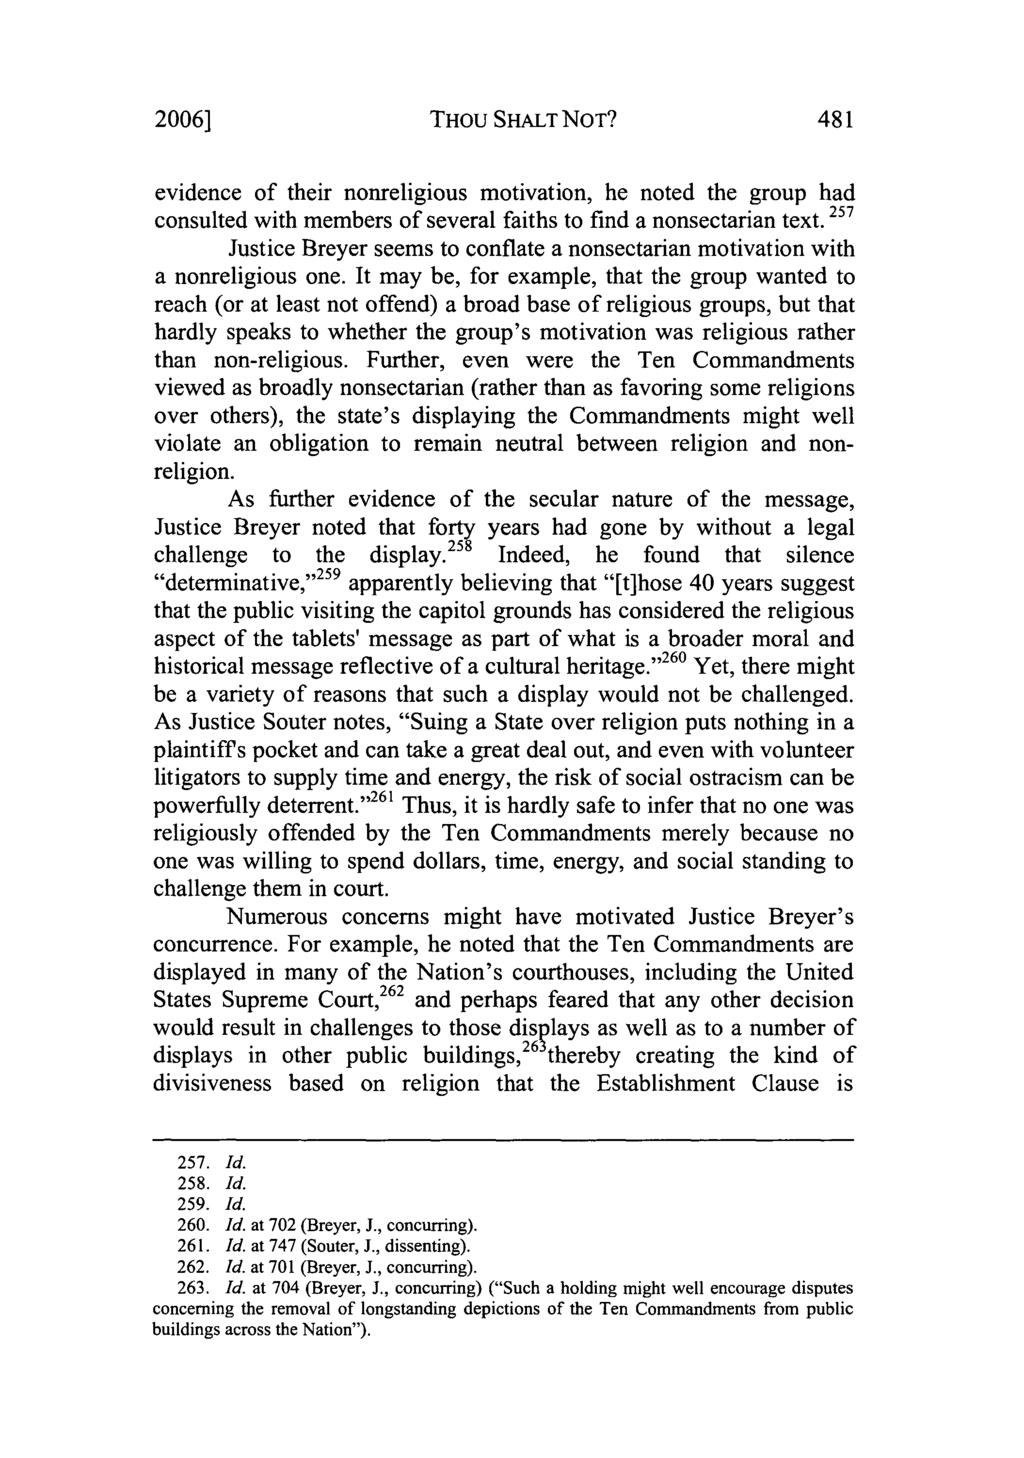 2006] THOU SHALT NOT? evidence of their nonreligious motivation, he noted the group had consulted with members of several faiths to find a nonsectarian text.